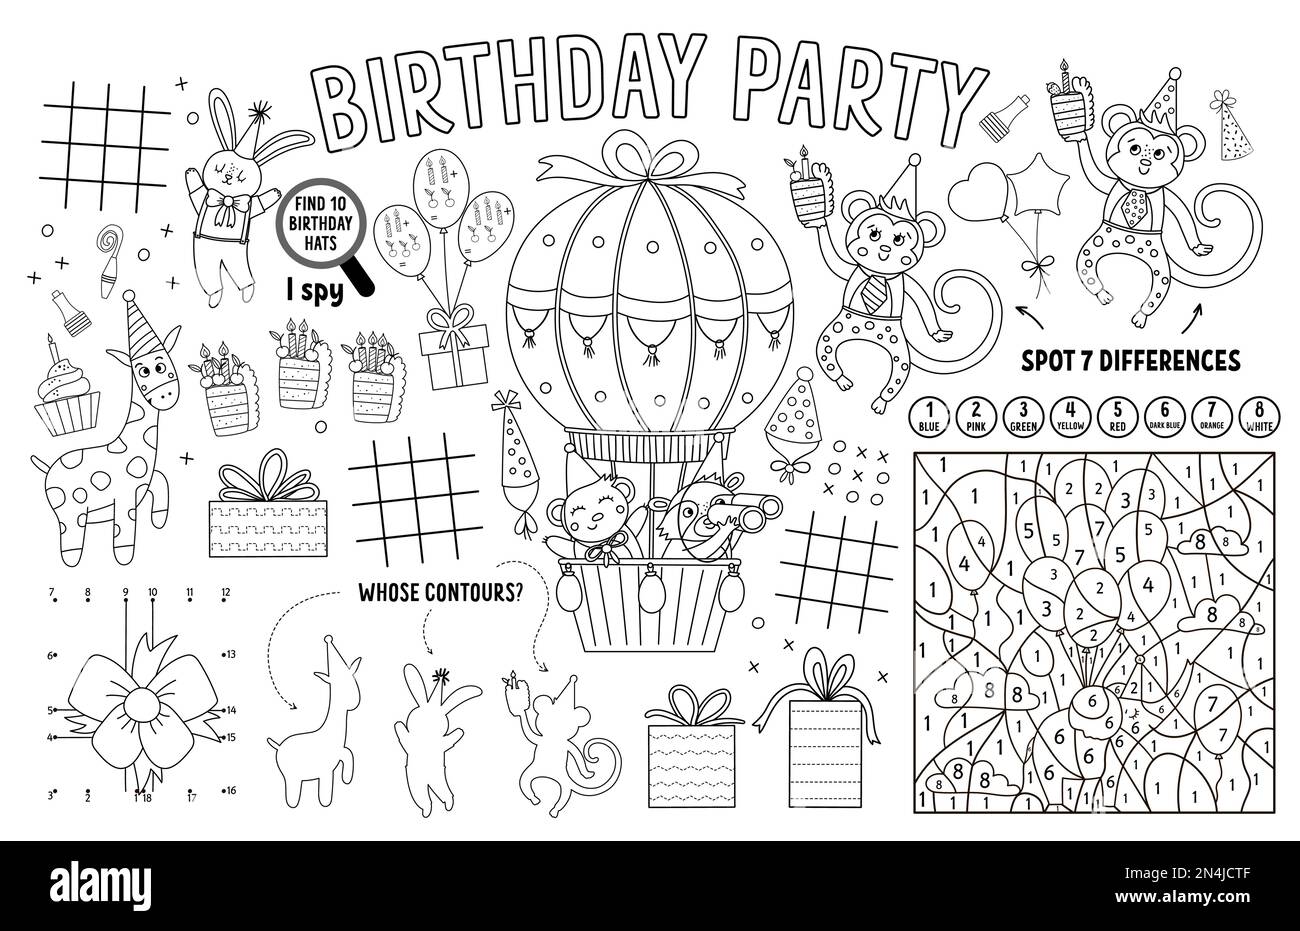 Vector Happy Birthday placemat for kids. Holiday party printable activity mat with maze, tic tac toe charts, connect the dots, find difference. Black Stock Vector